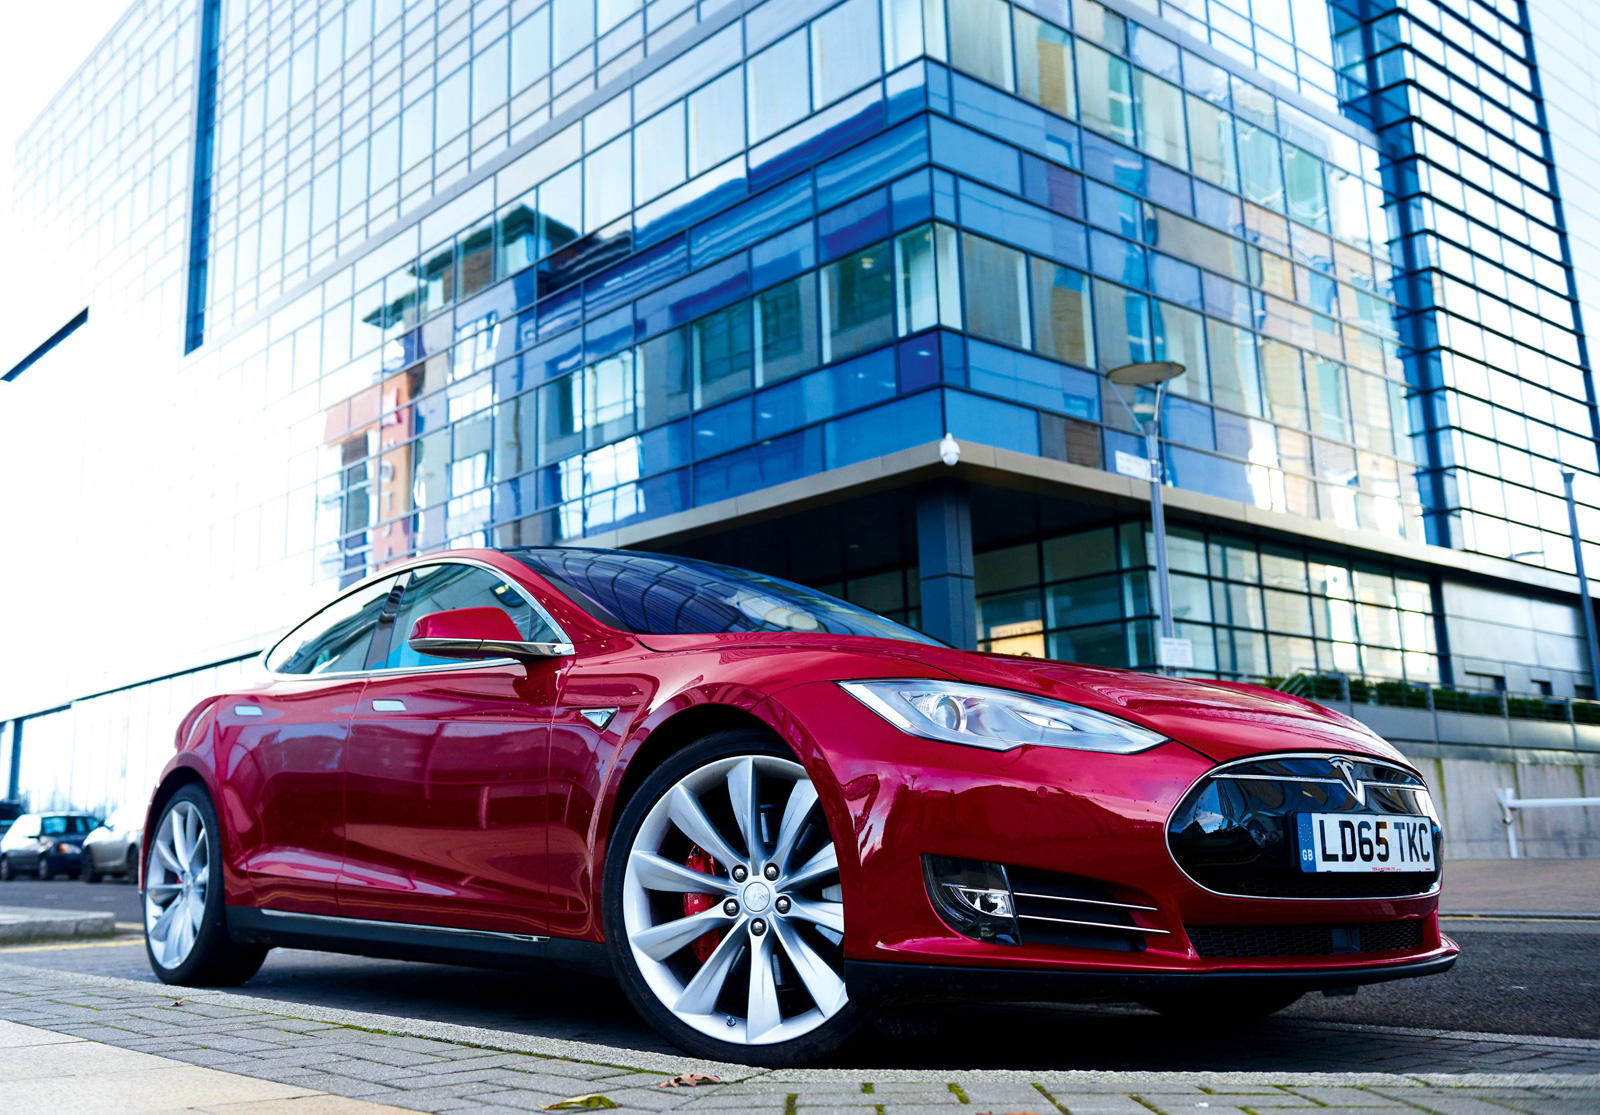 Some Tesla owners with older vehicles are experiencing a range of worrisome issues